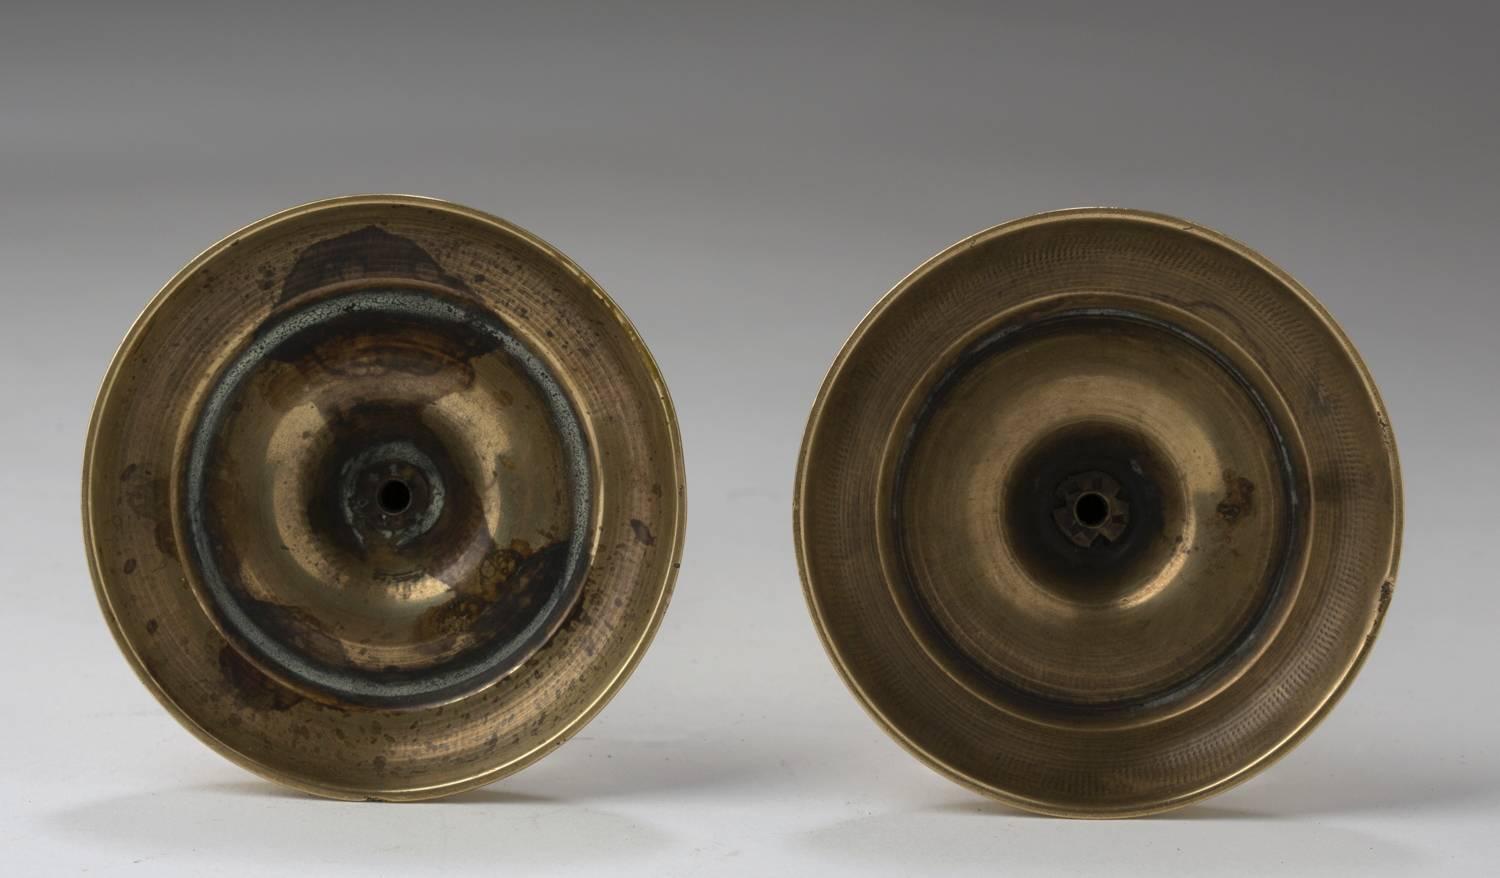 English, brass pair of round base seamed taper candlesticks 4.75″ H, 2.75″ base diameter, circa 1750.
They usually sat on the pulls of a secretary reflecting light from the mirrors and used to soften sealing wax or for travelling due to their size.